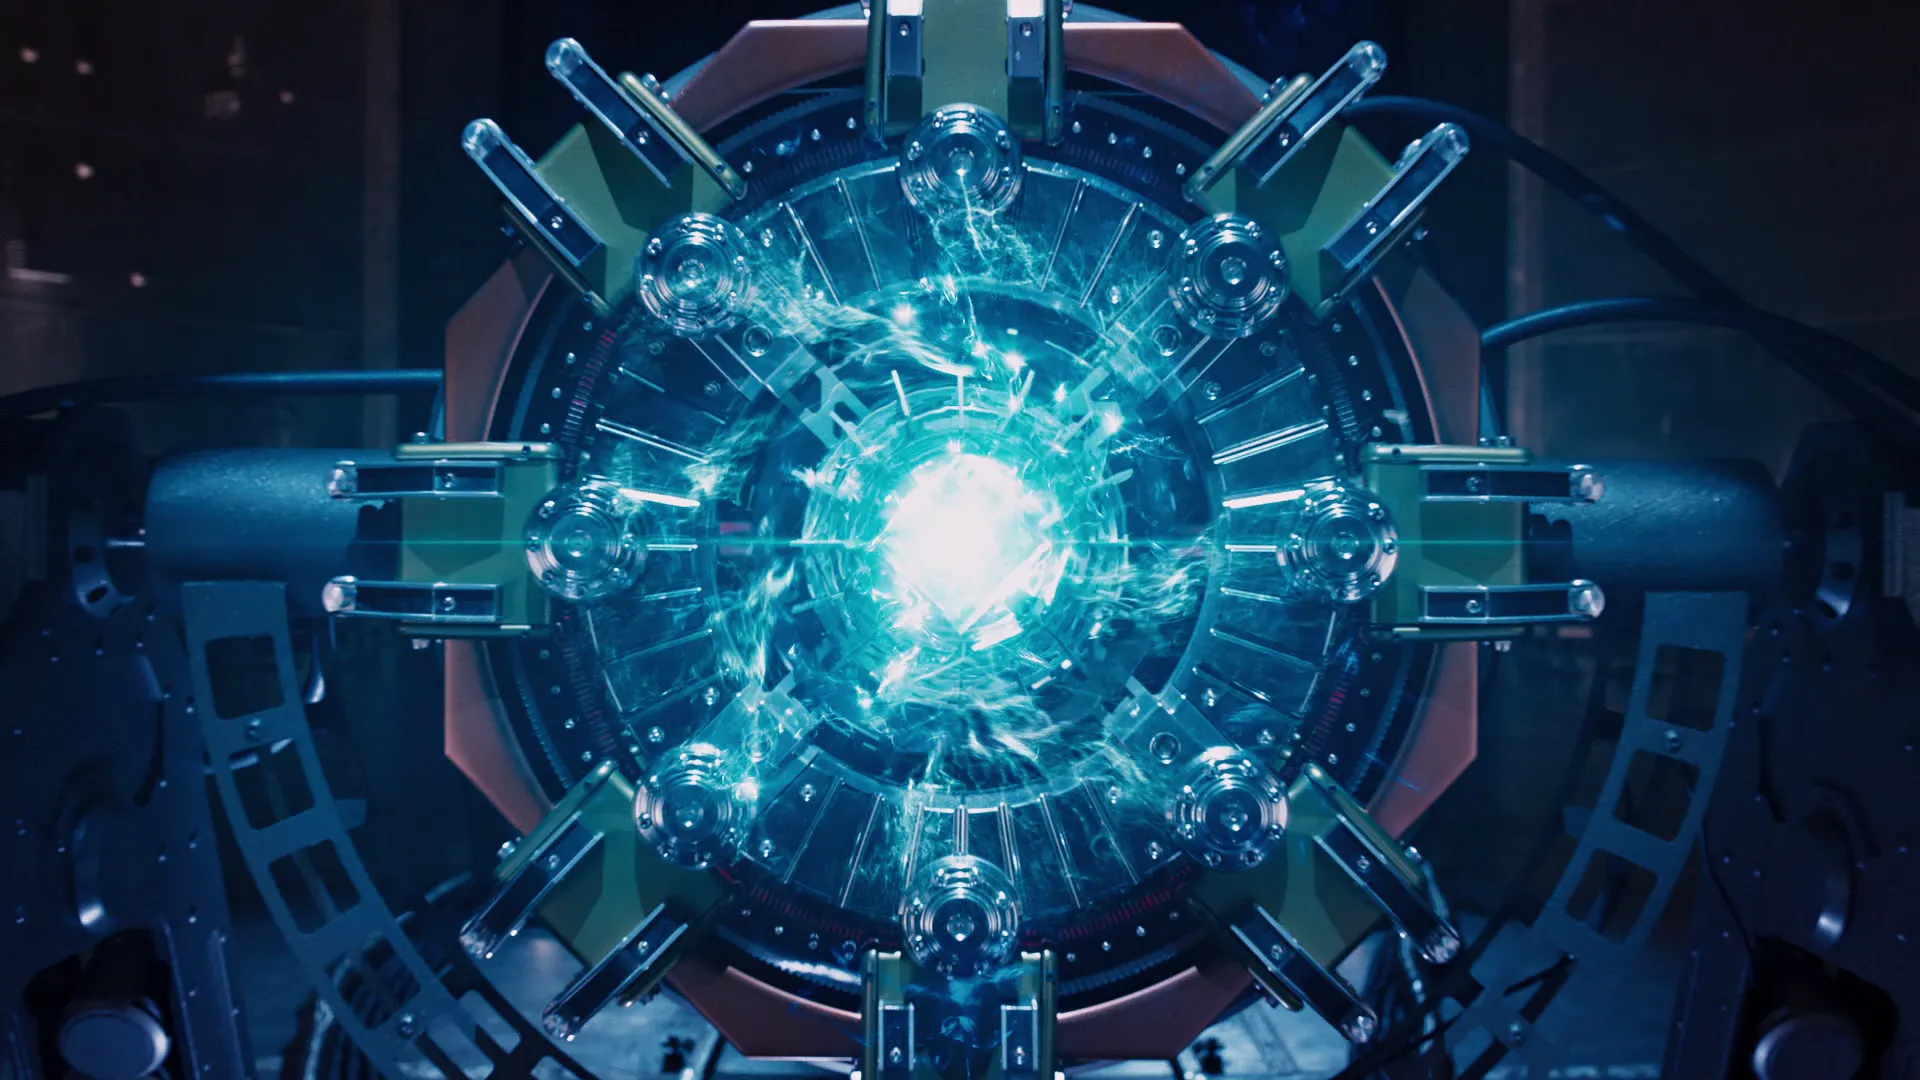 https://marvelcinematicuniverse.fandom.com/wiki/Joint_Dark_Energy_Mission_Facility?file=Tesseract_ta.png Source: Marvelcinematicuniverse.wikia.com